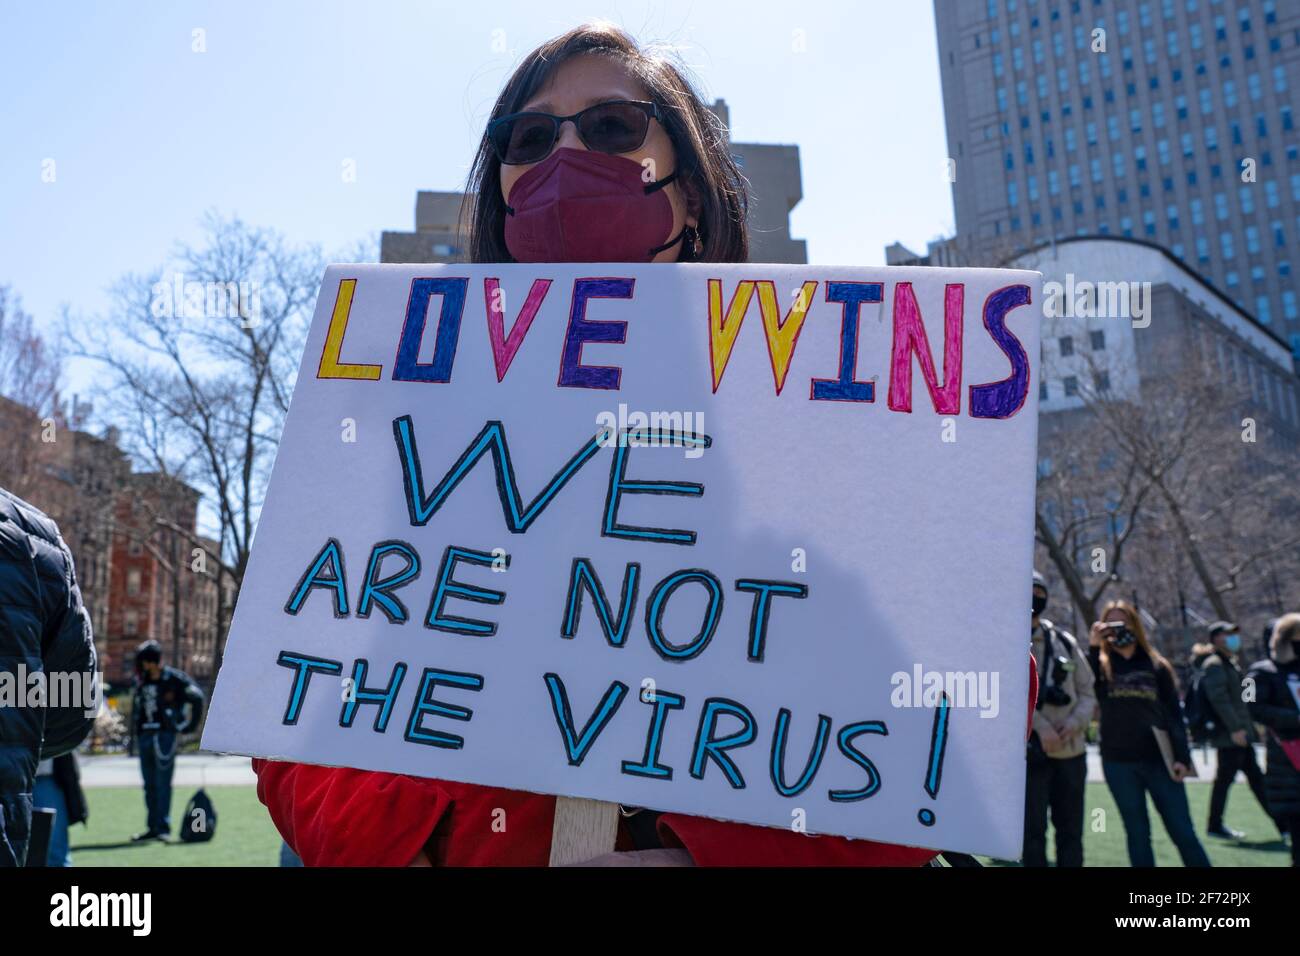 A woman holds a sign that reads 'love wins we are not the virus!' at a rally against hate in Columbus Park.A rally for solidarity was organized in response to a rise in hate crimes against the Asian community since the start of the coronavirus (COVID-19) pandemic in 2020. On March 16 in Atlanta, Georgia, a man went on a shooting spree in three spas that left eight people dead, including six Asian women. Stock Photo